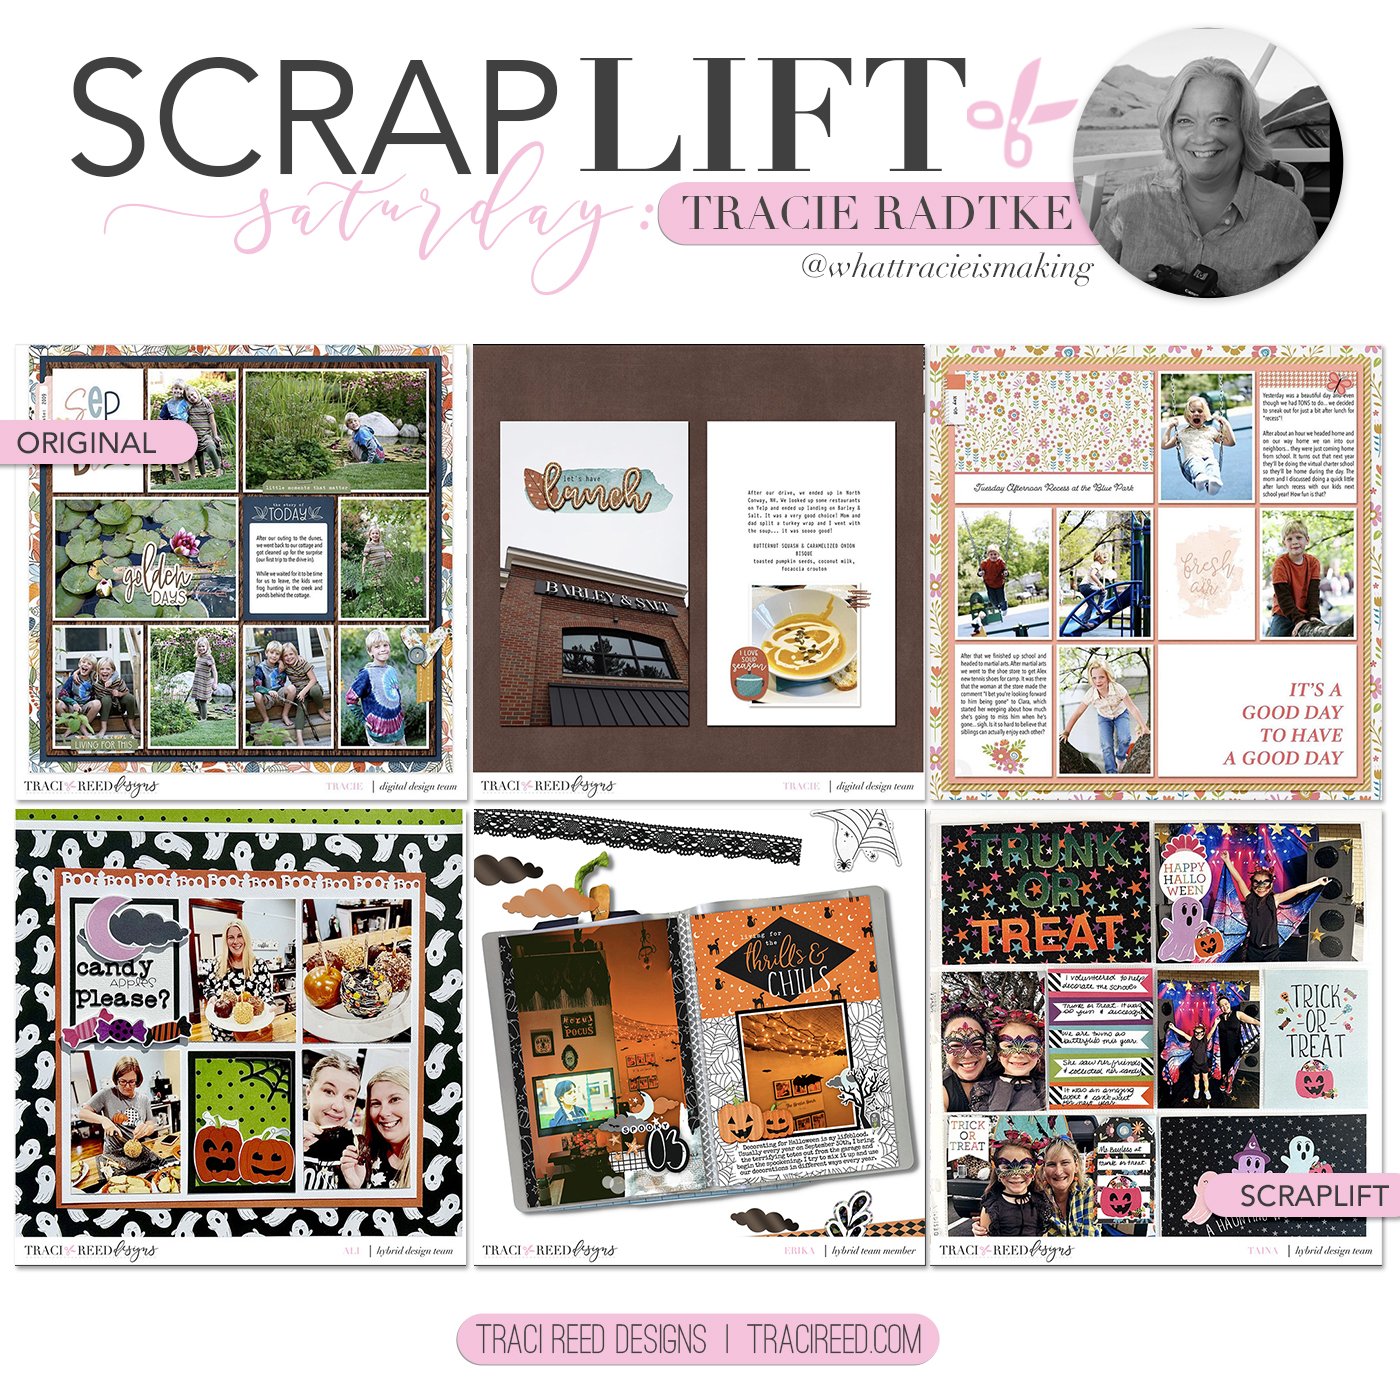 Minimalist Scrapbooking with a Photo Book Series - Simple Scrapper